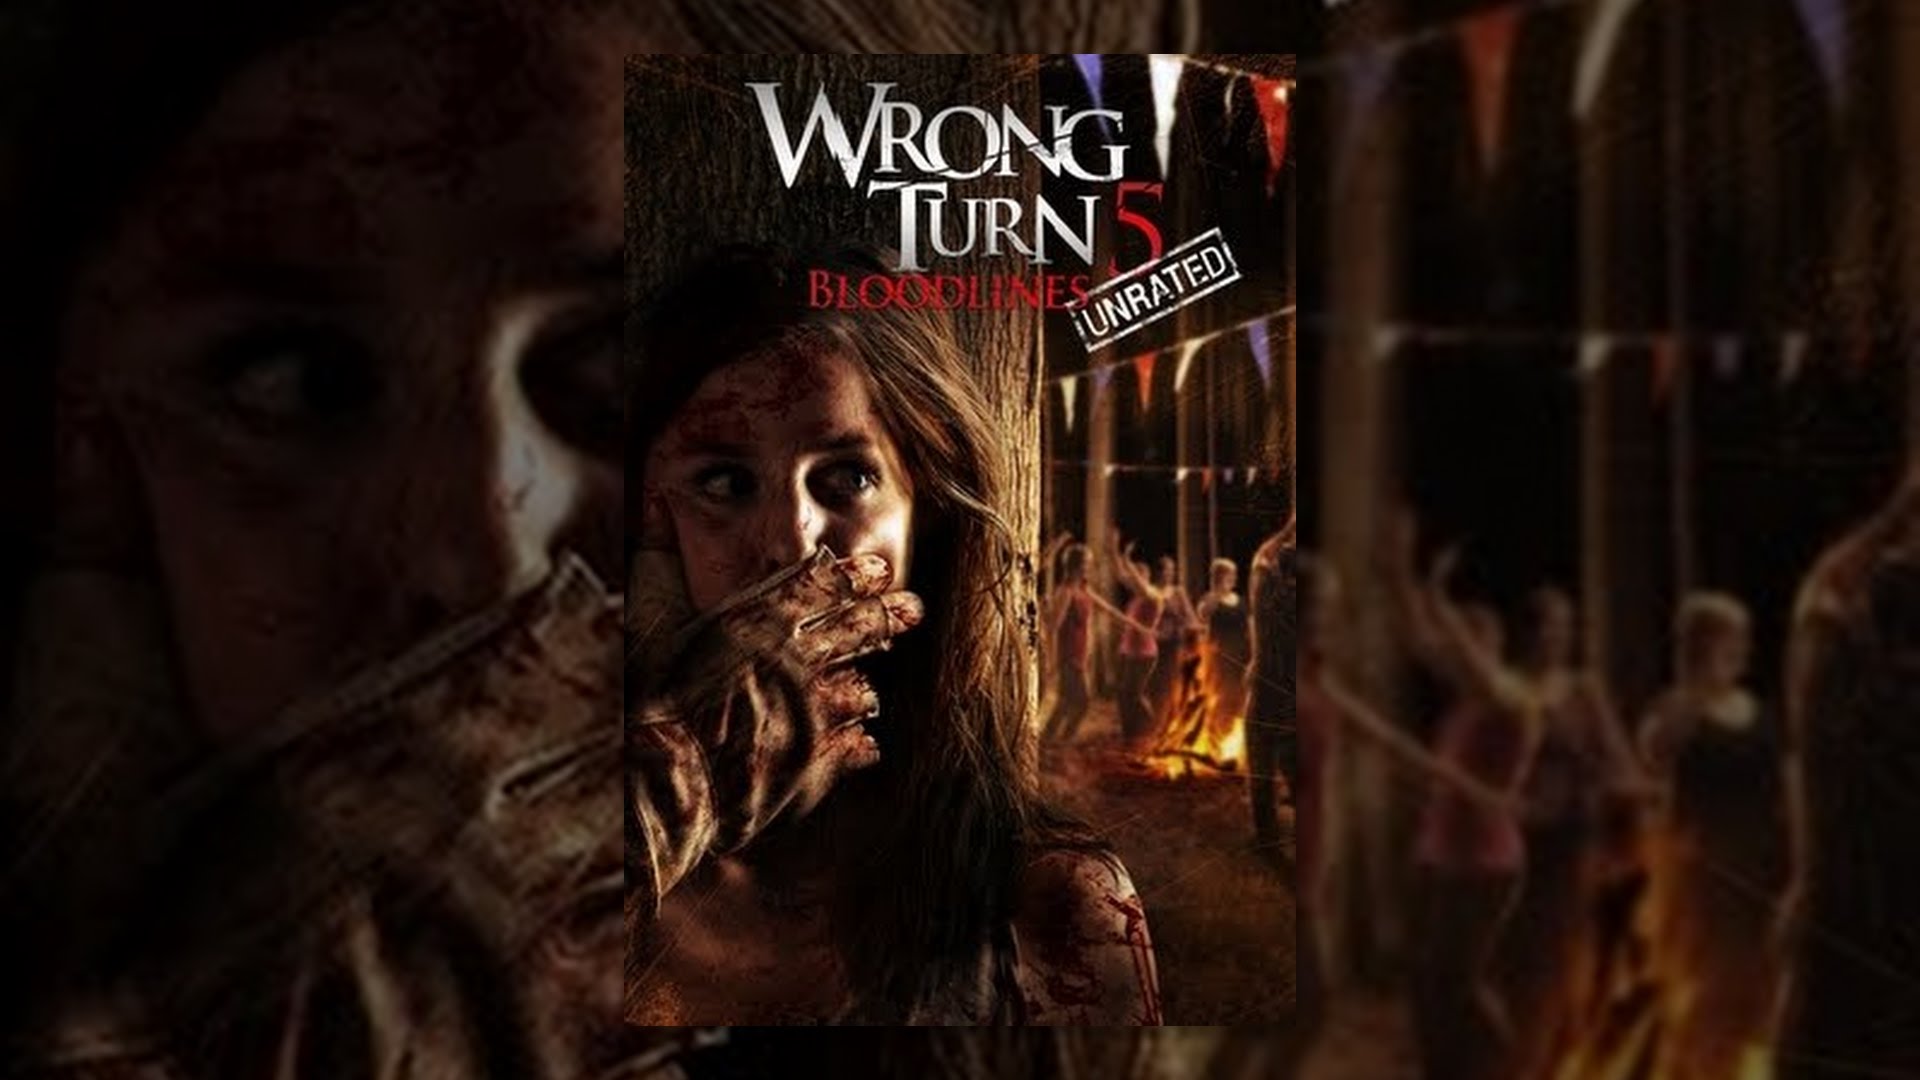 Wrong Turn 5: Bloodlines (Unrated) - YouTube